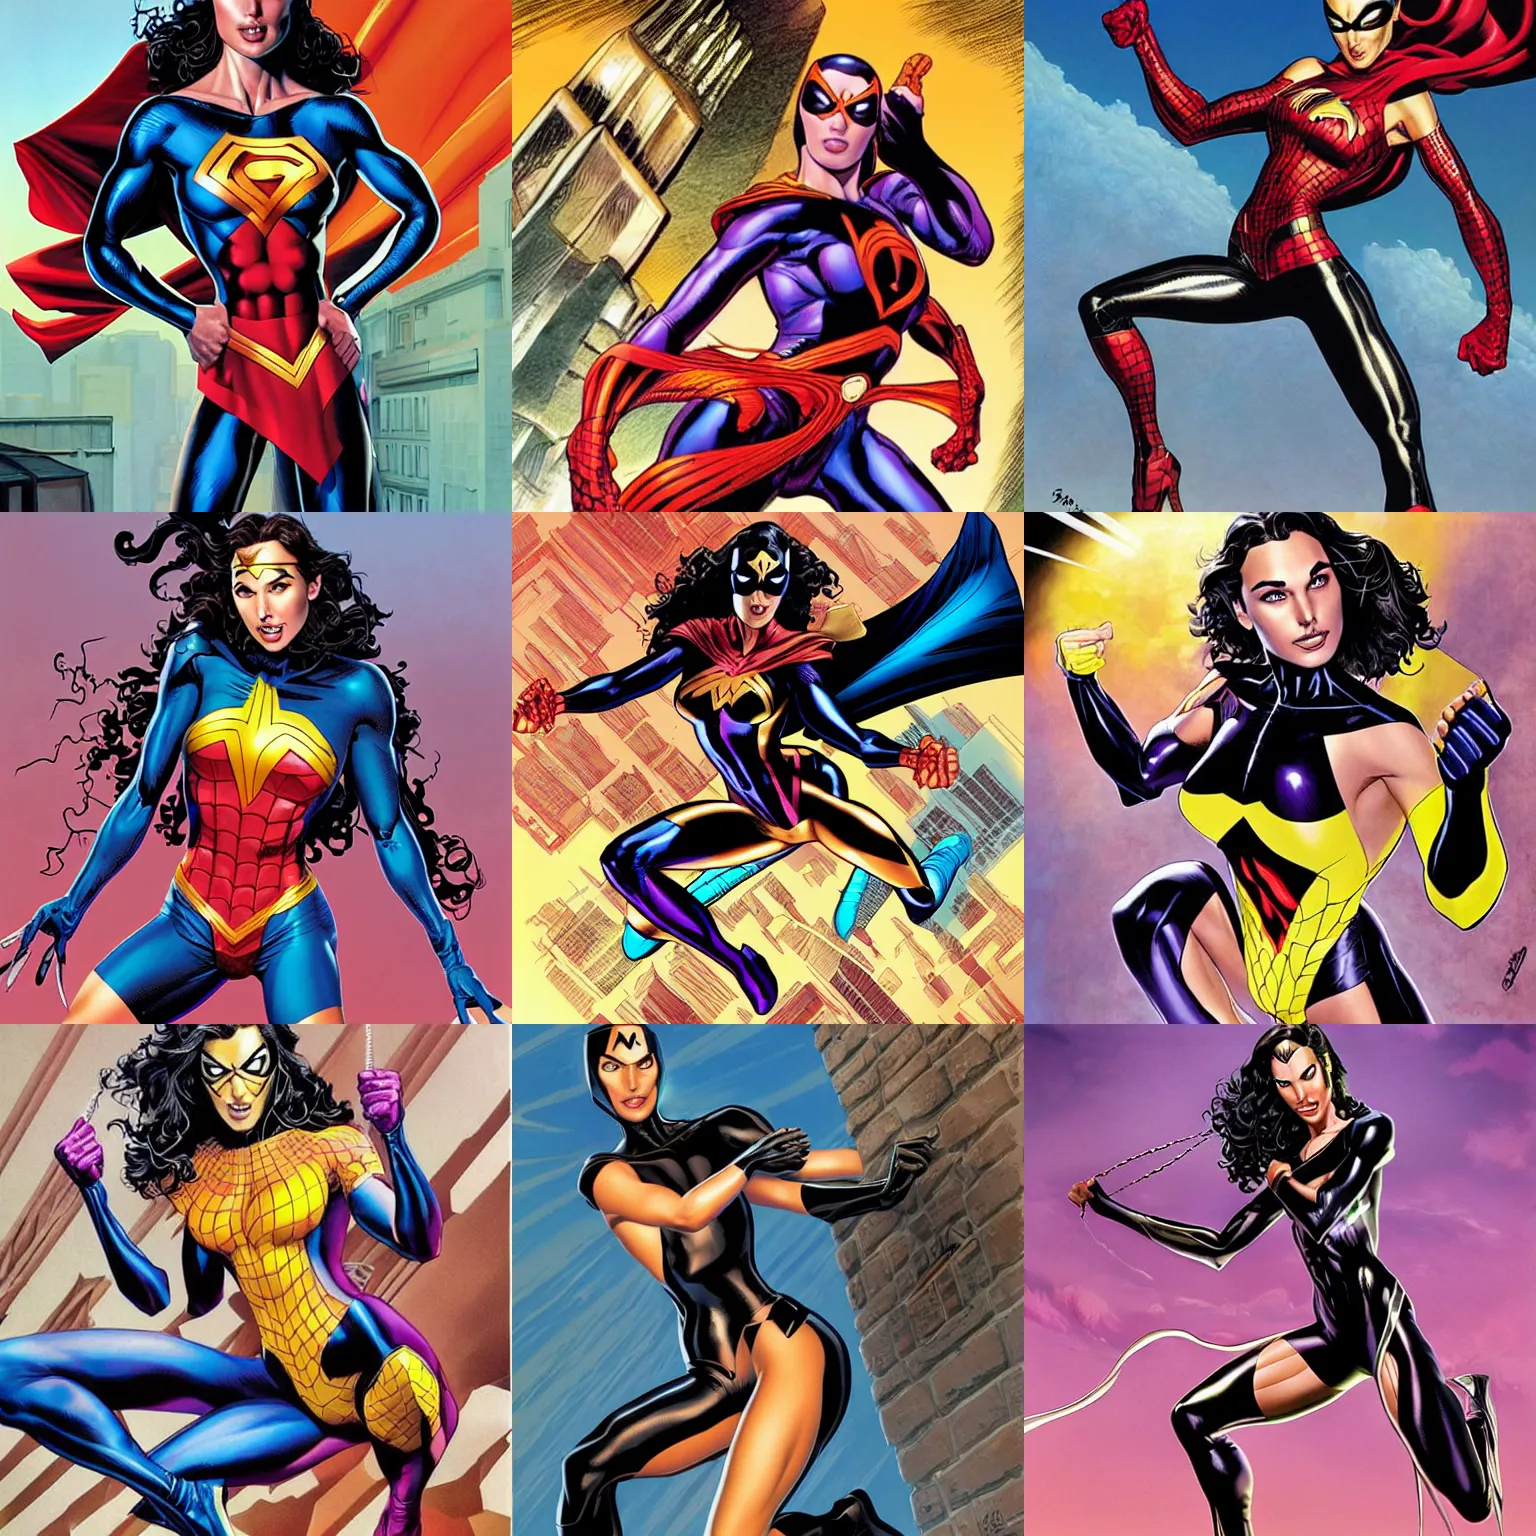 Super Heroine Silhouette 13 Different Poses Stock Vector (Royalty Free)  684154738 | Shutterstock